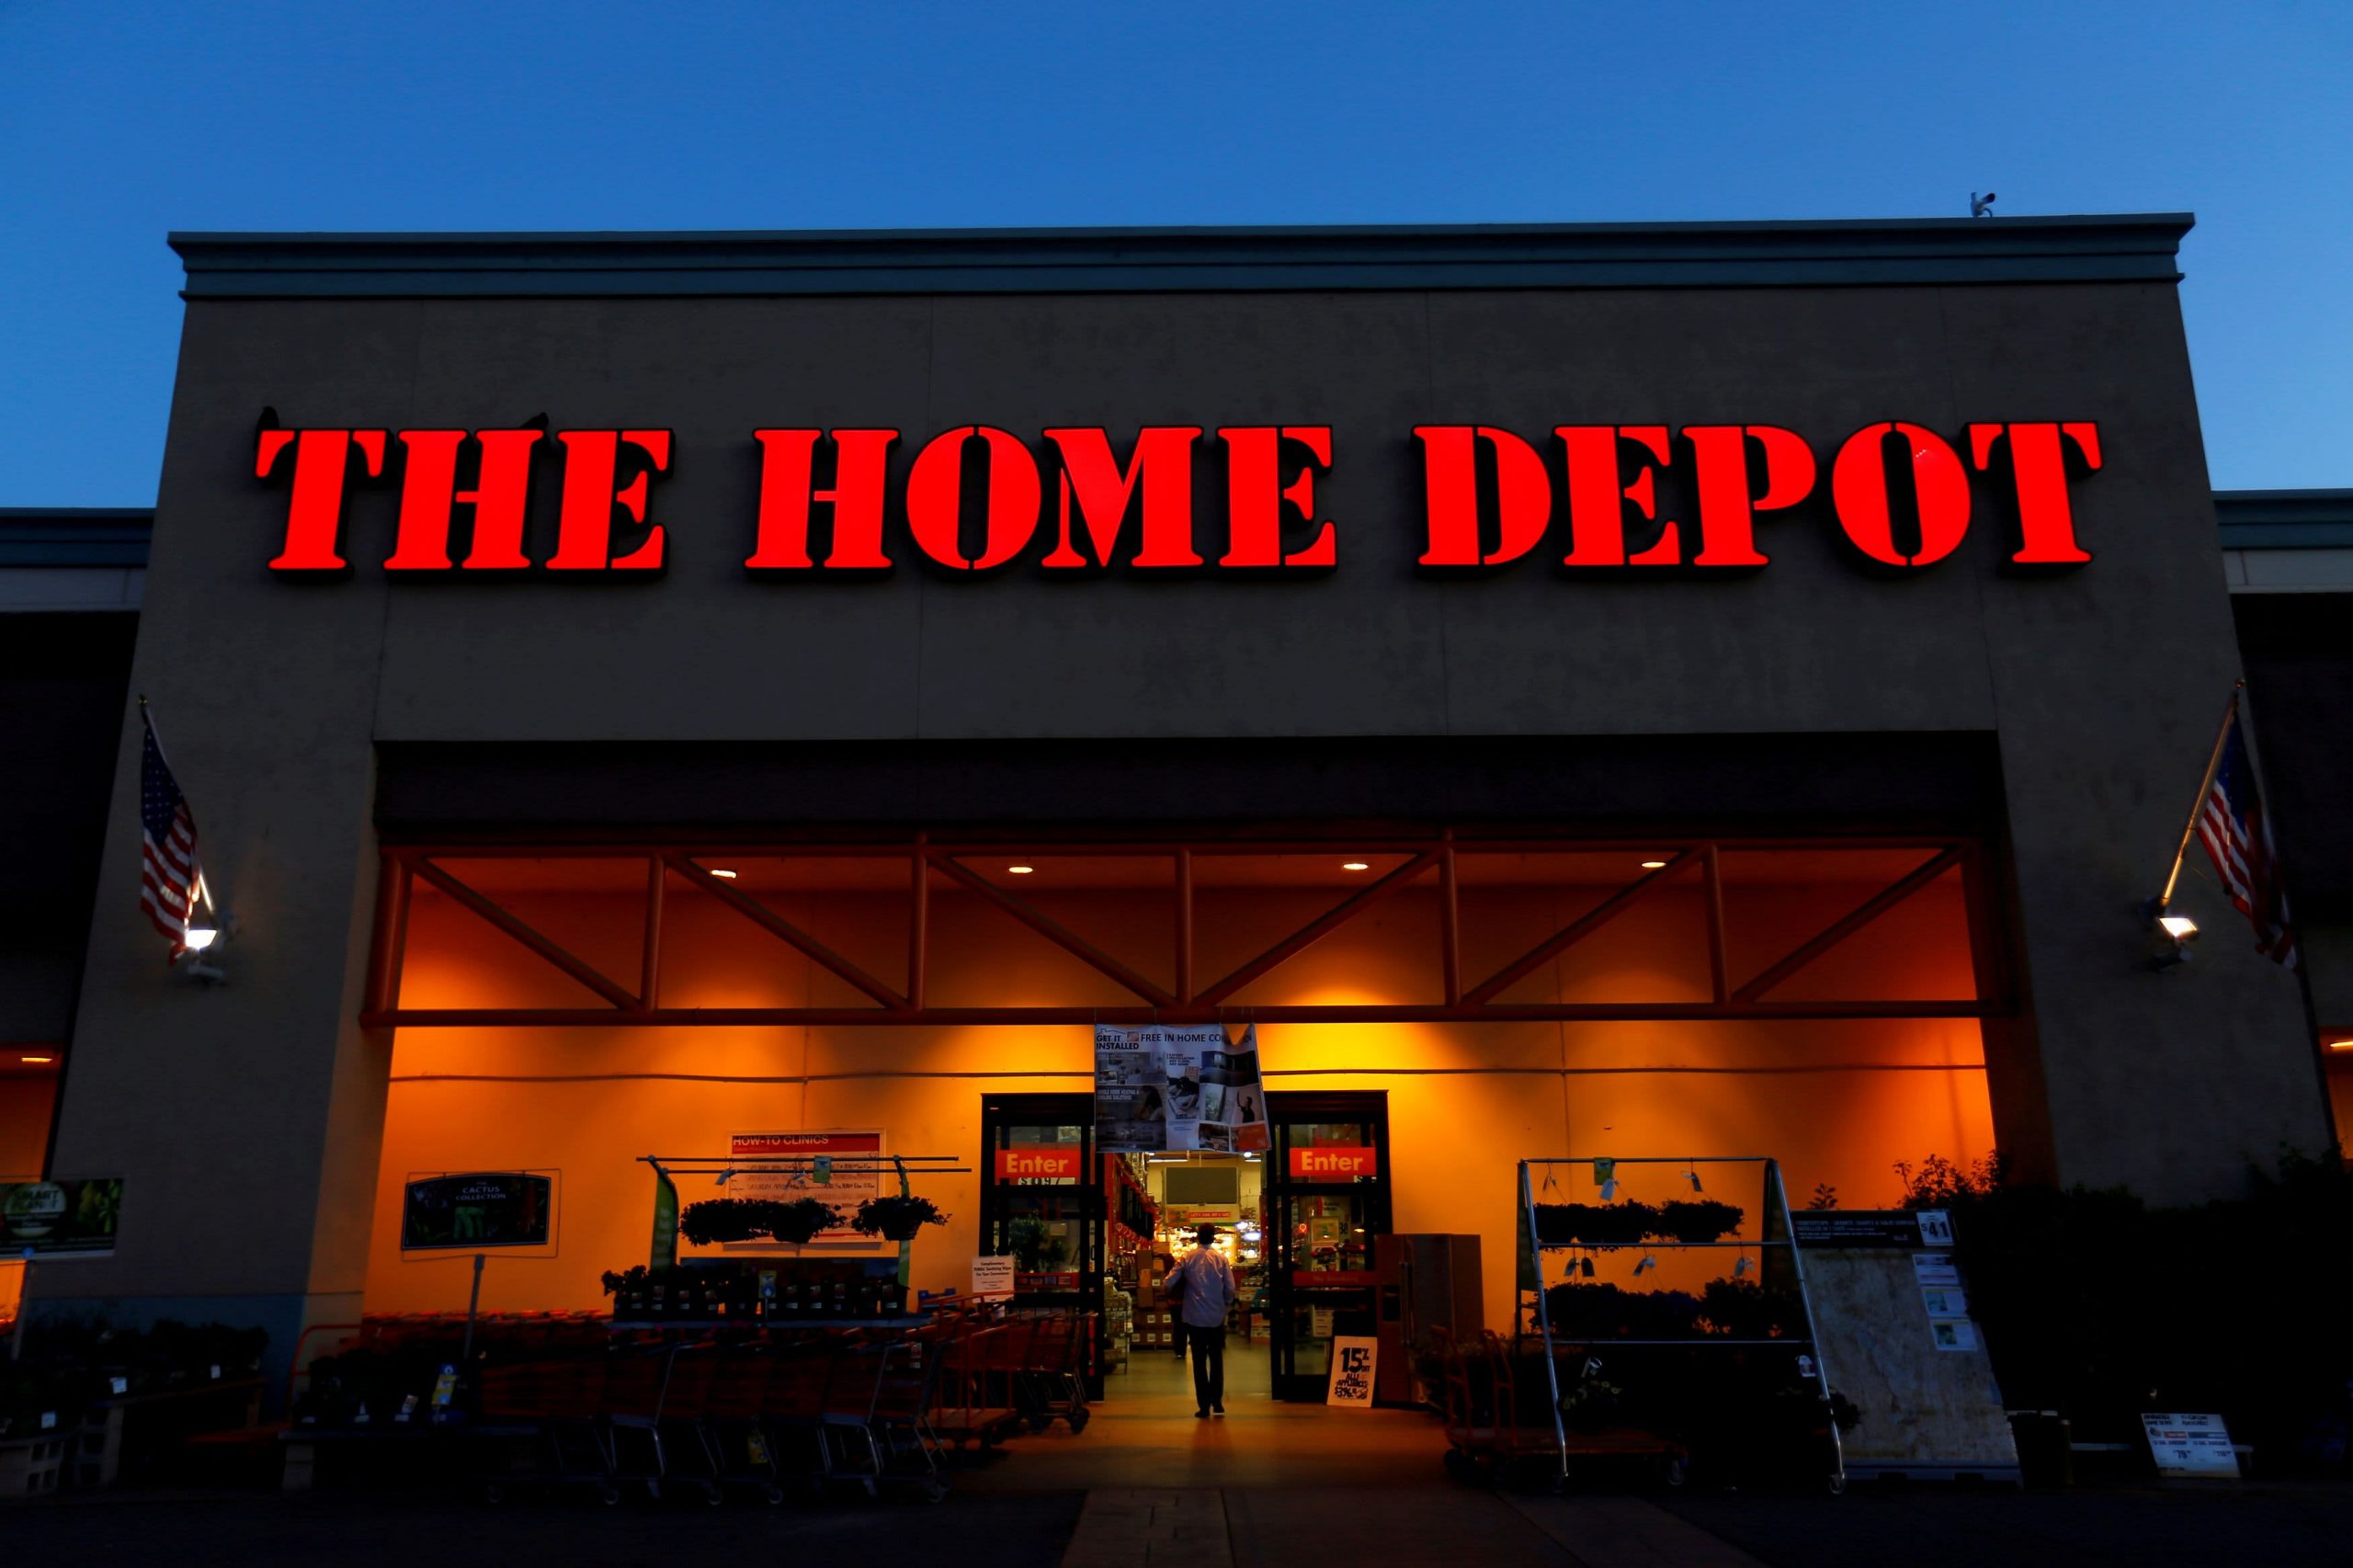 How bad are global shipping snafus? Home Depot contracted its own container ship as a safeguard